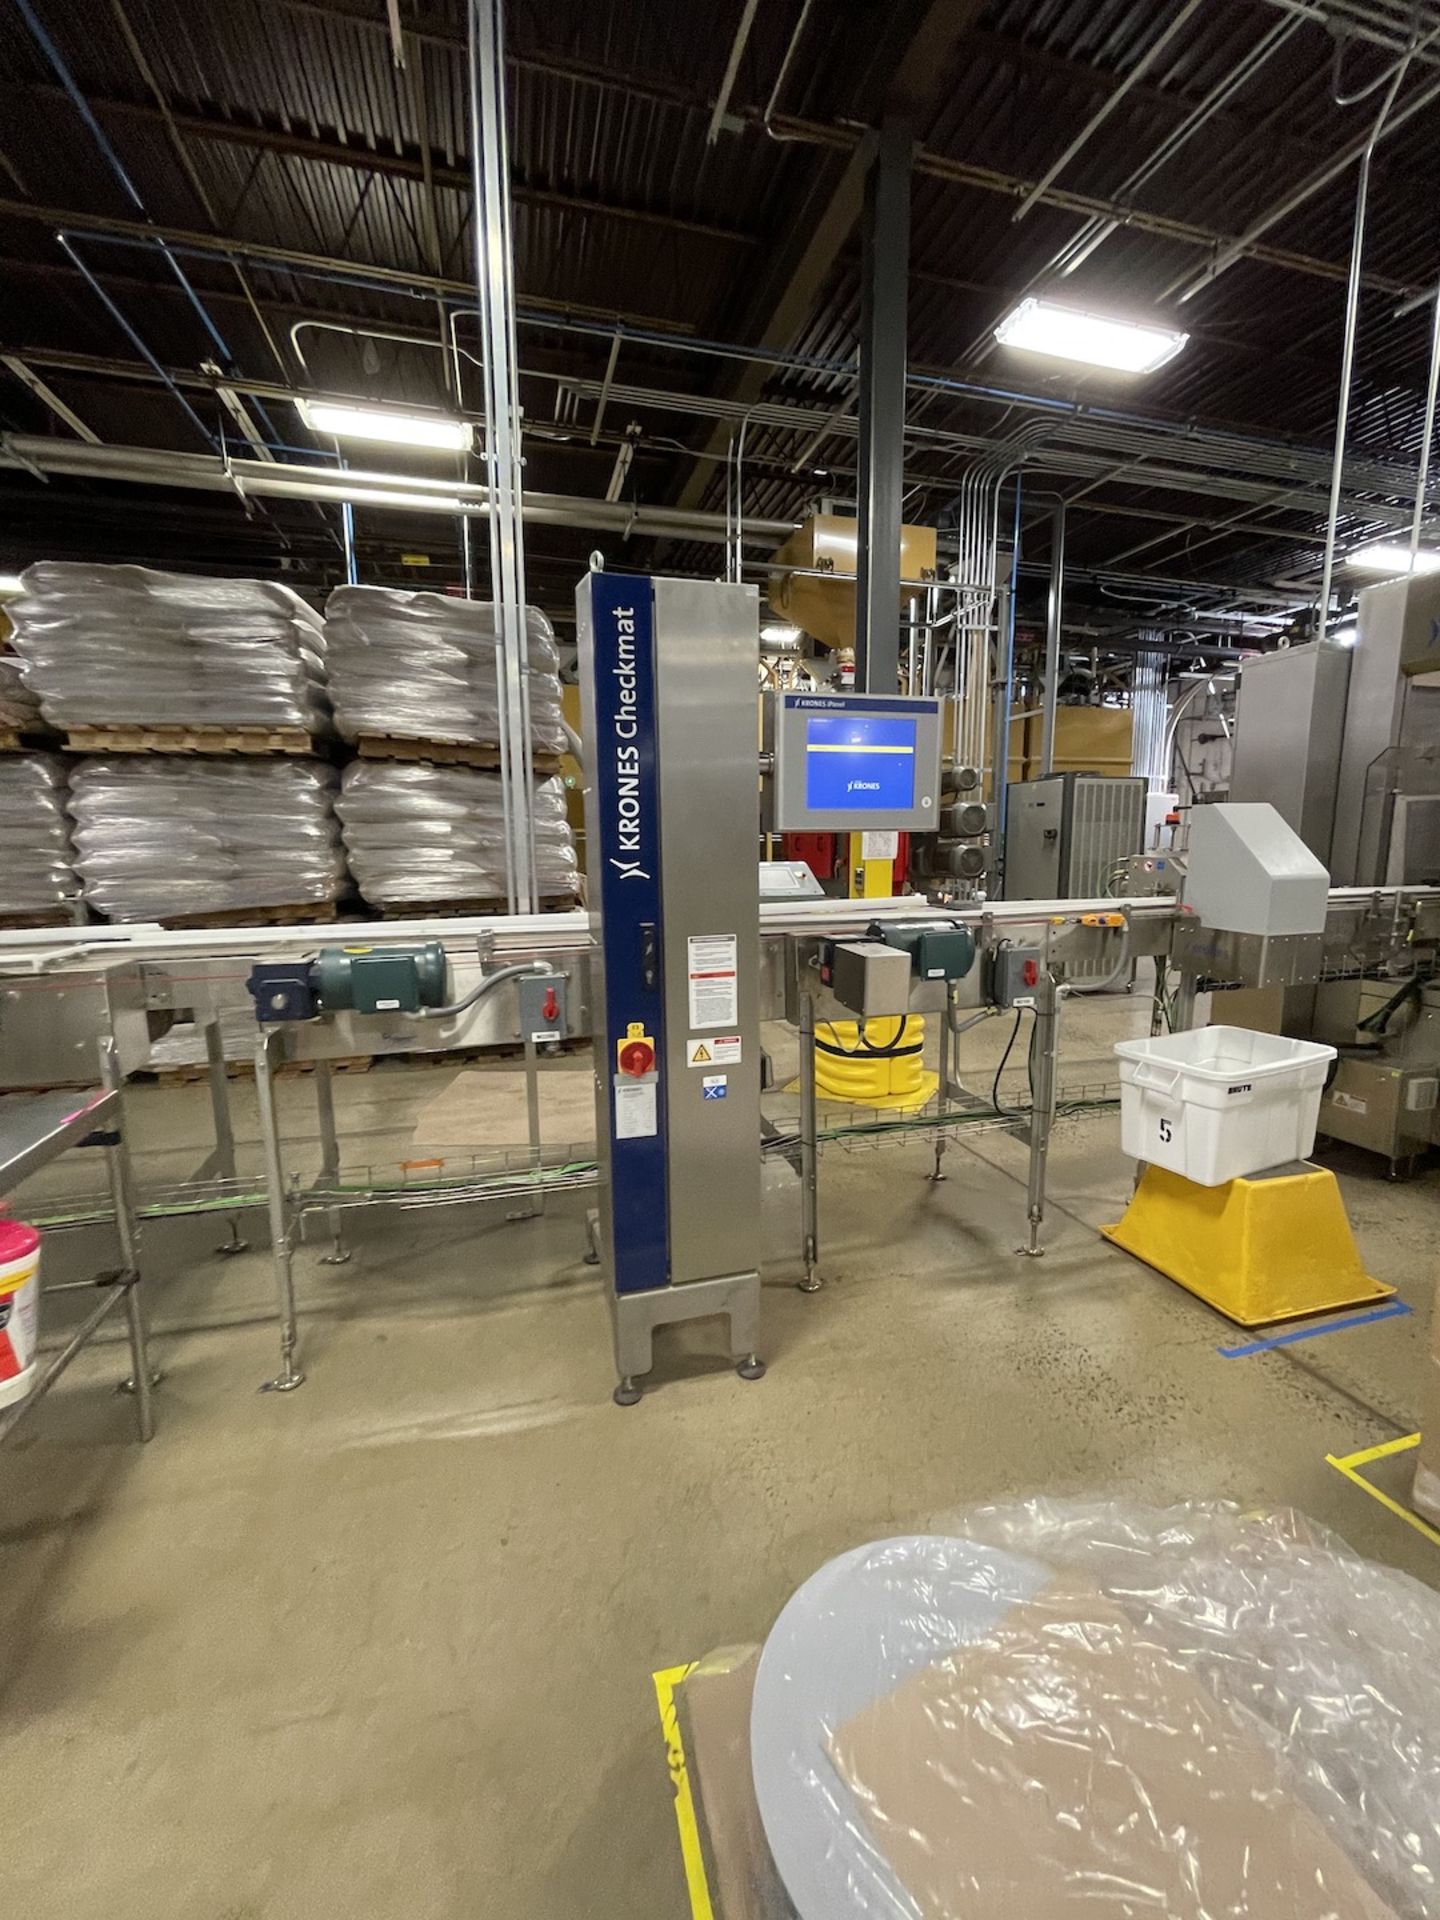 KRONES CHECKMAT INSPECTION SYSTEM, TYPE CHECKMAT 7.5 (2019 MFG) - Image 3 of 10